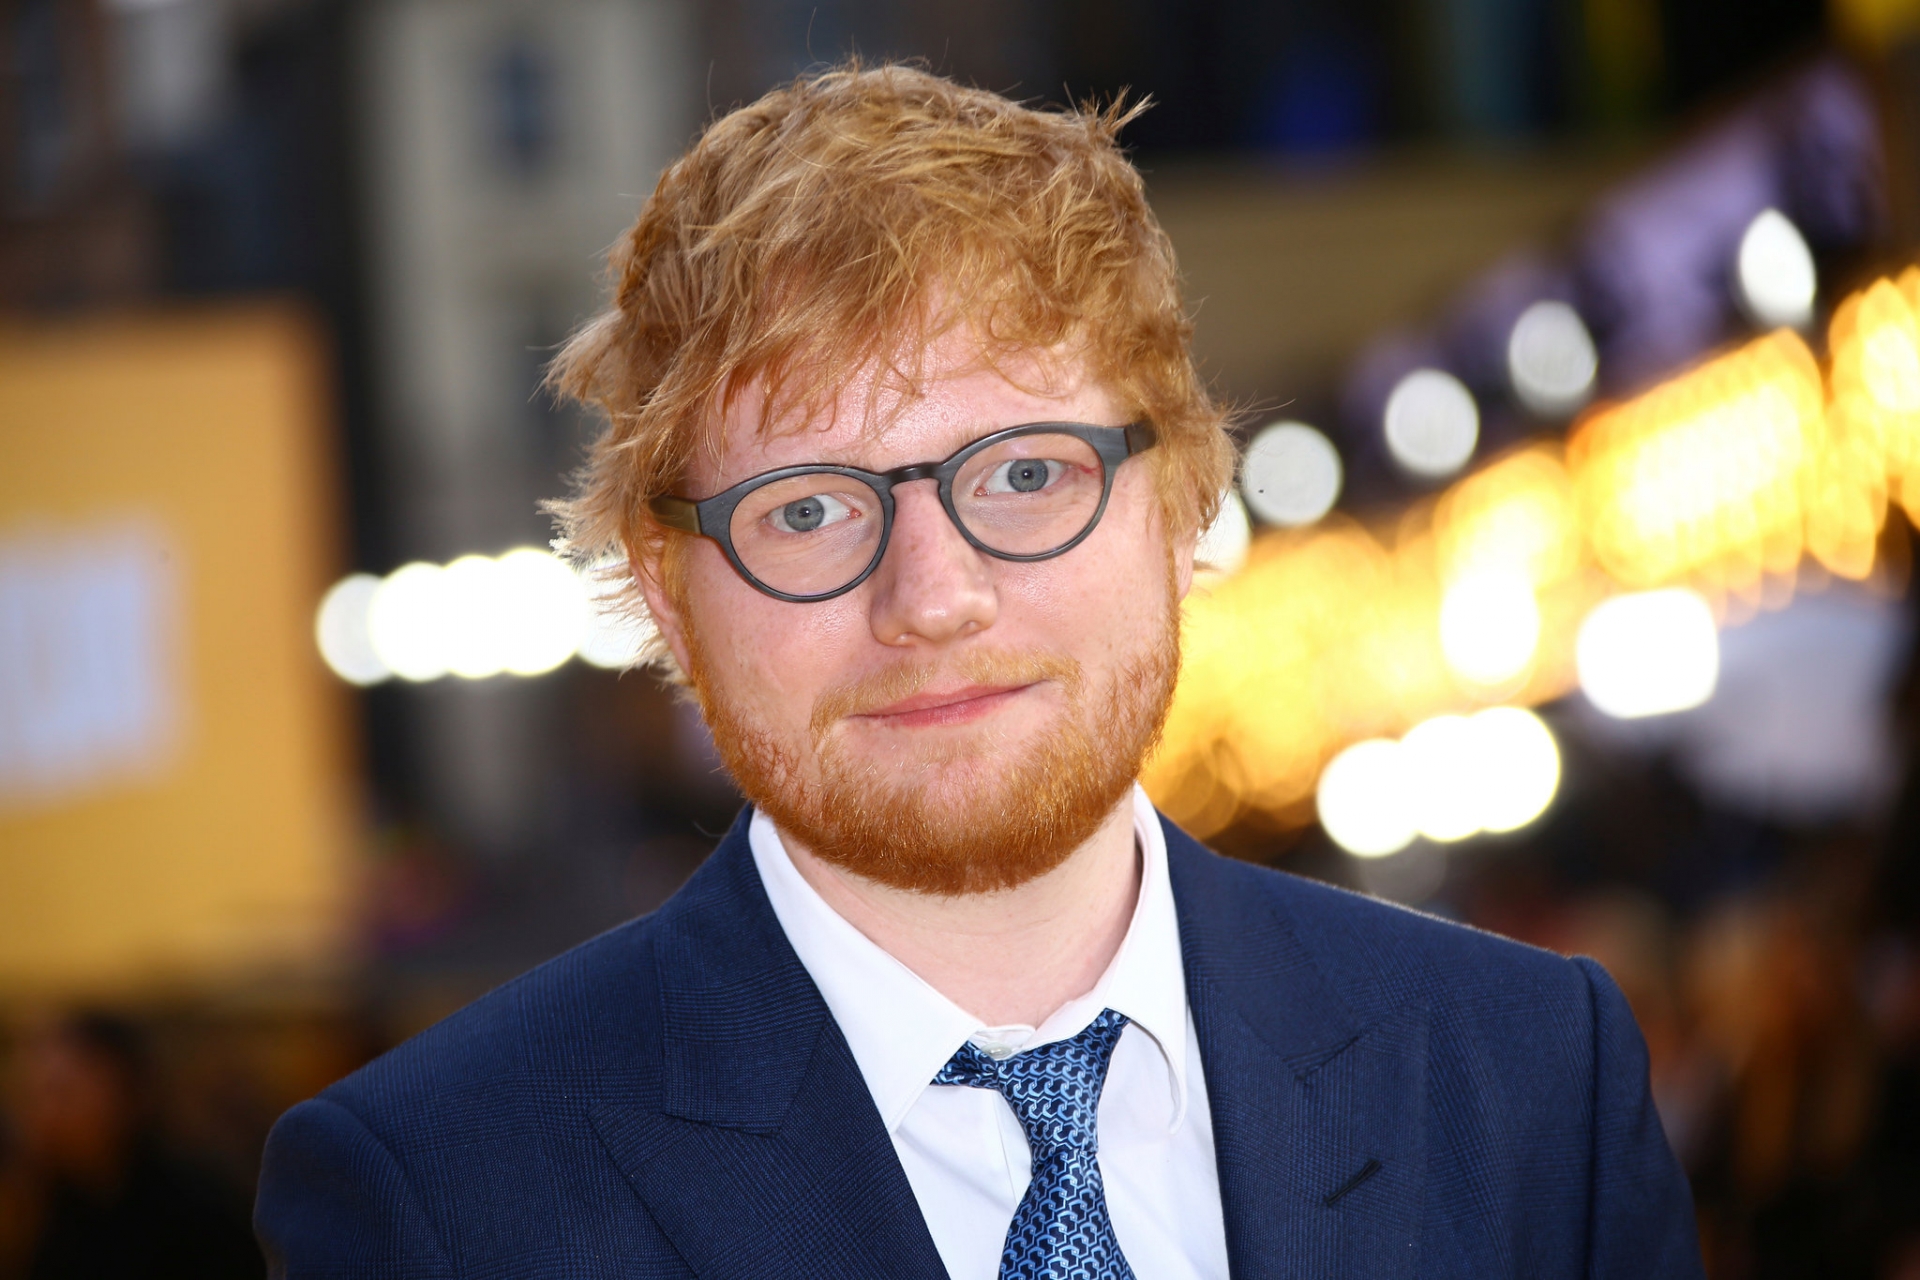 Who is Ed Sheeran, musical prodigy release a new album after 18 months?